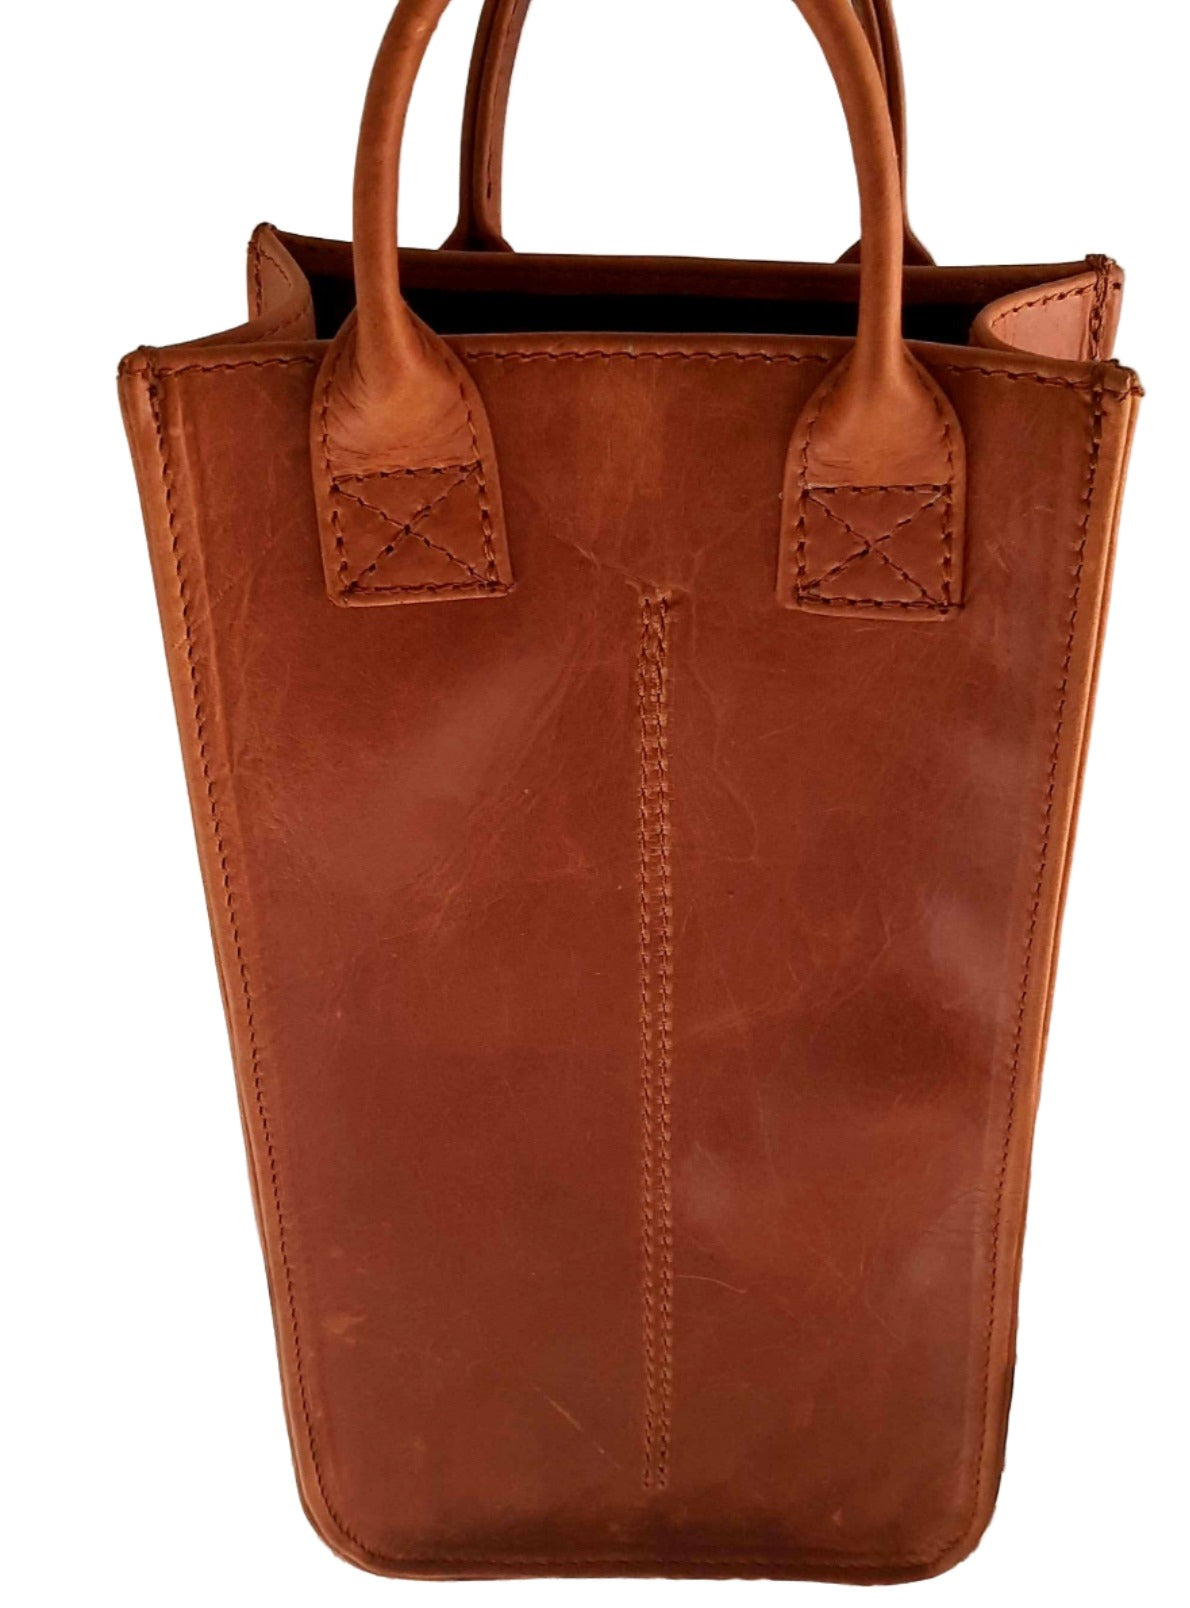 Cape wine bags by Cape Masai Leather toffee tan